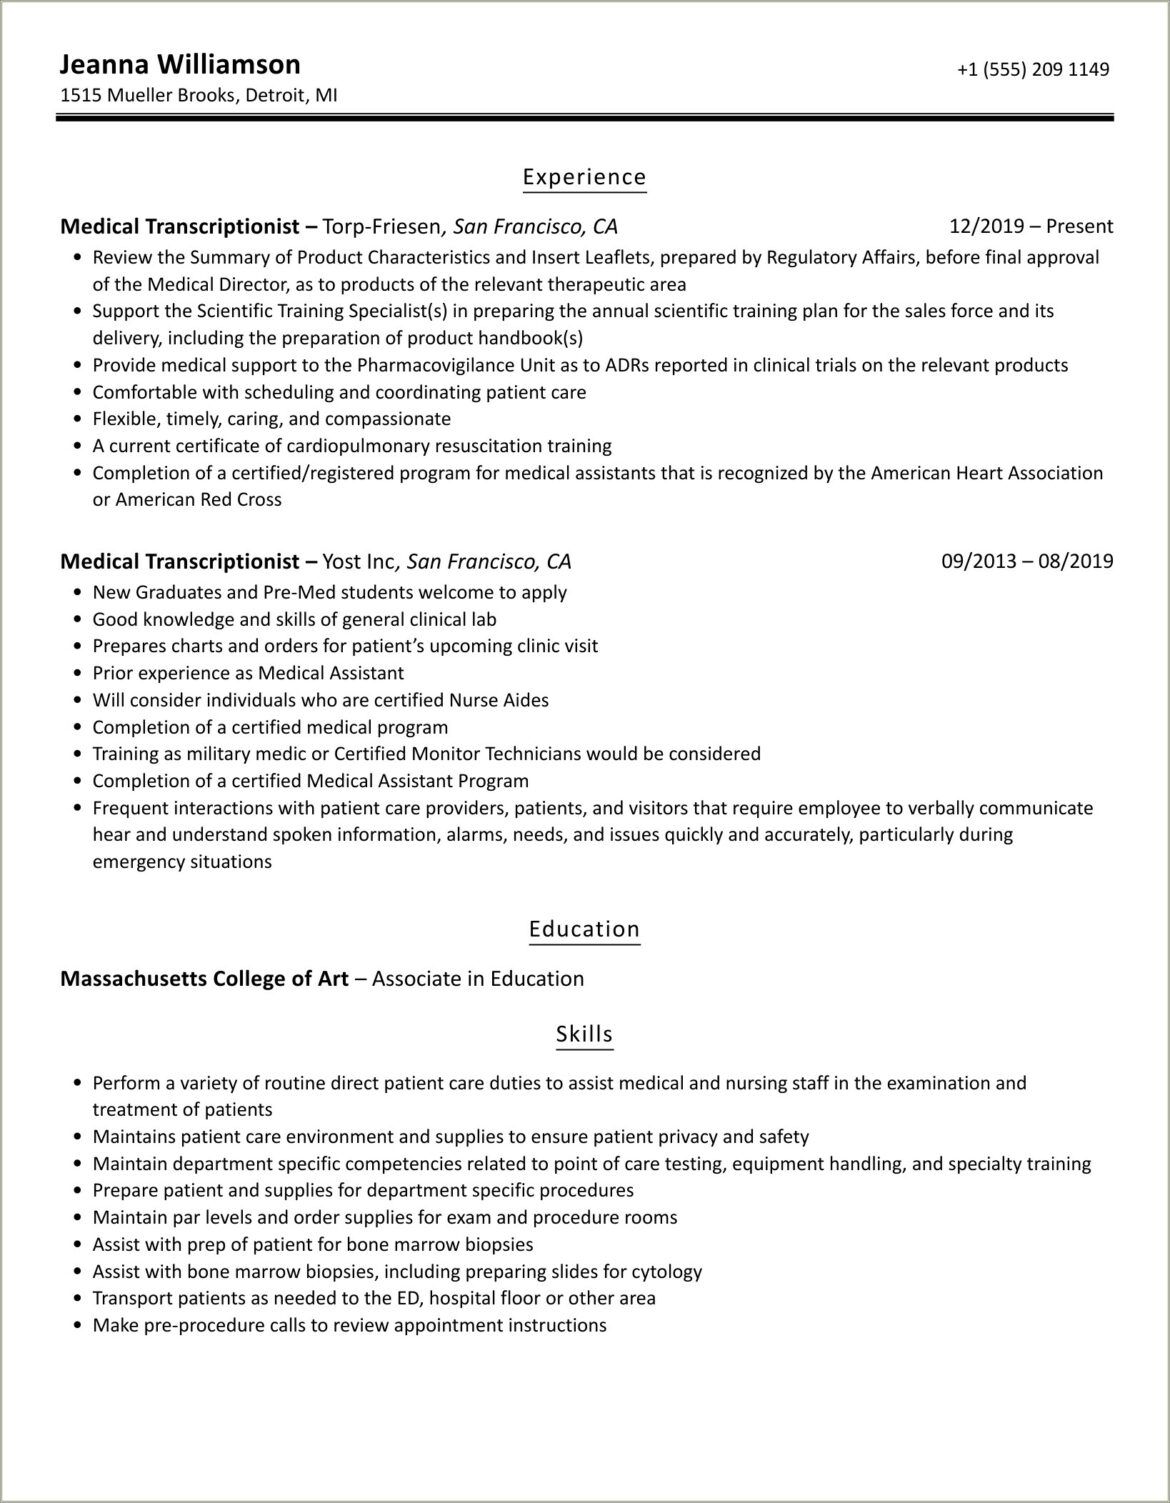 Sample Resume For Medical Transcriptionist With No Experience